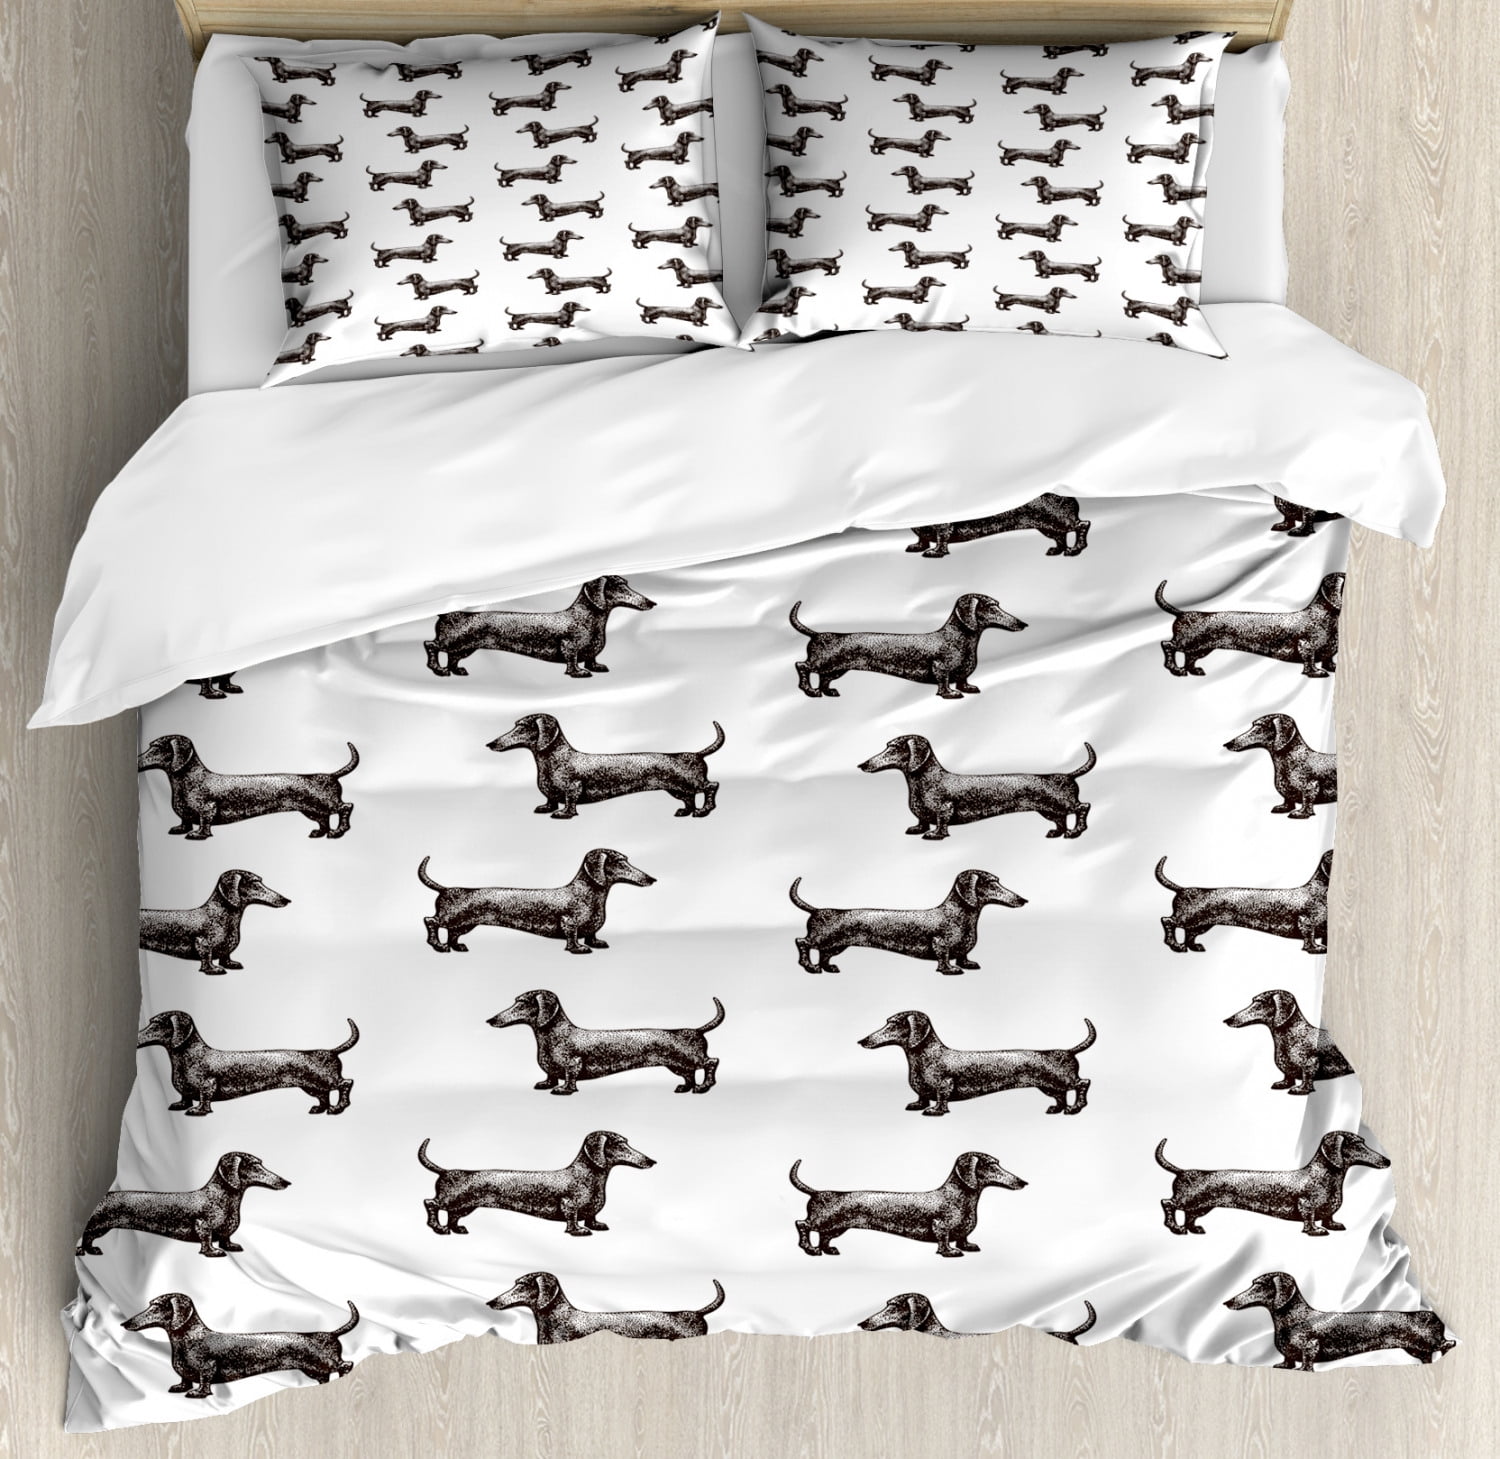 Duvet Cover Fully Reversible Quilt Cover & Pillowcase Bed Set Sausage Dog Animal 